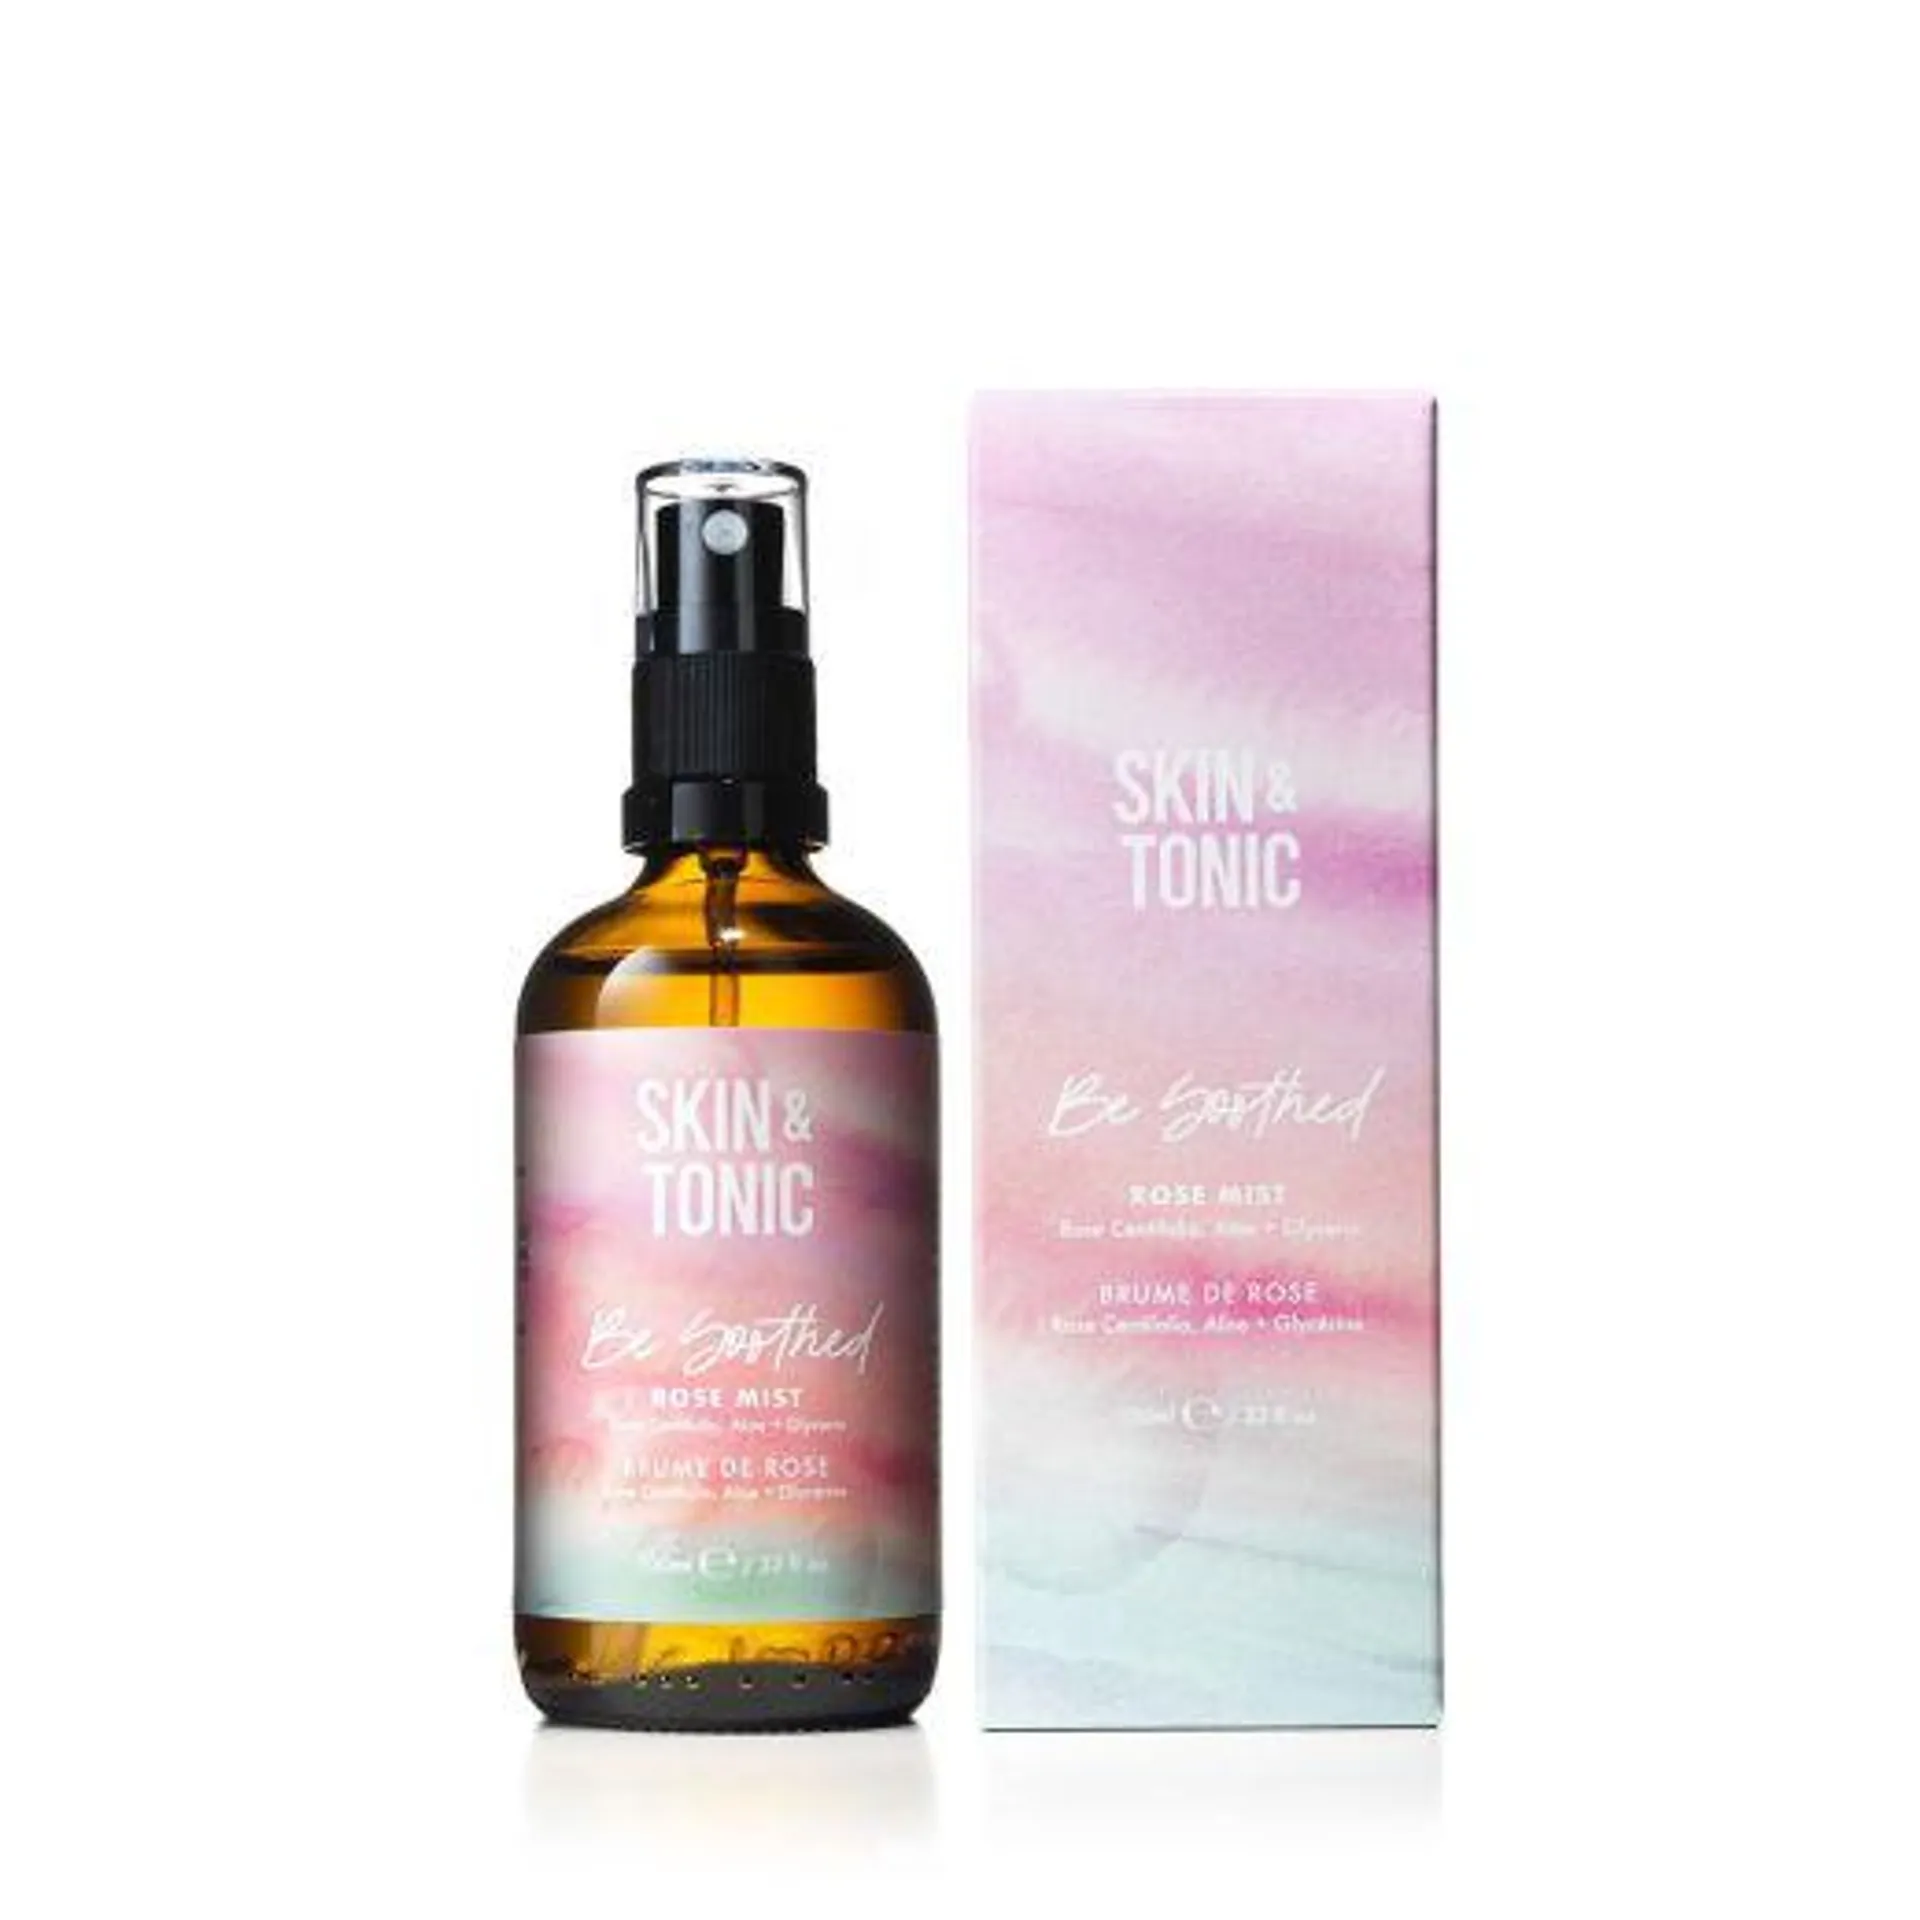 Skin & Tonic Be Soothed Rose Mist